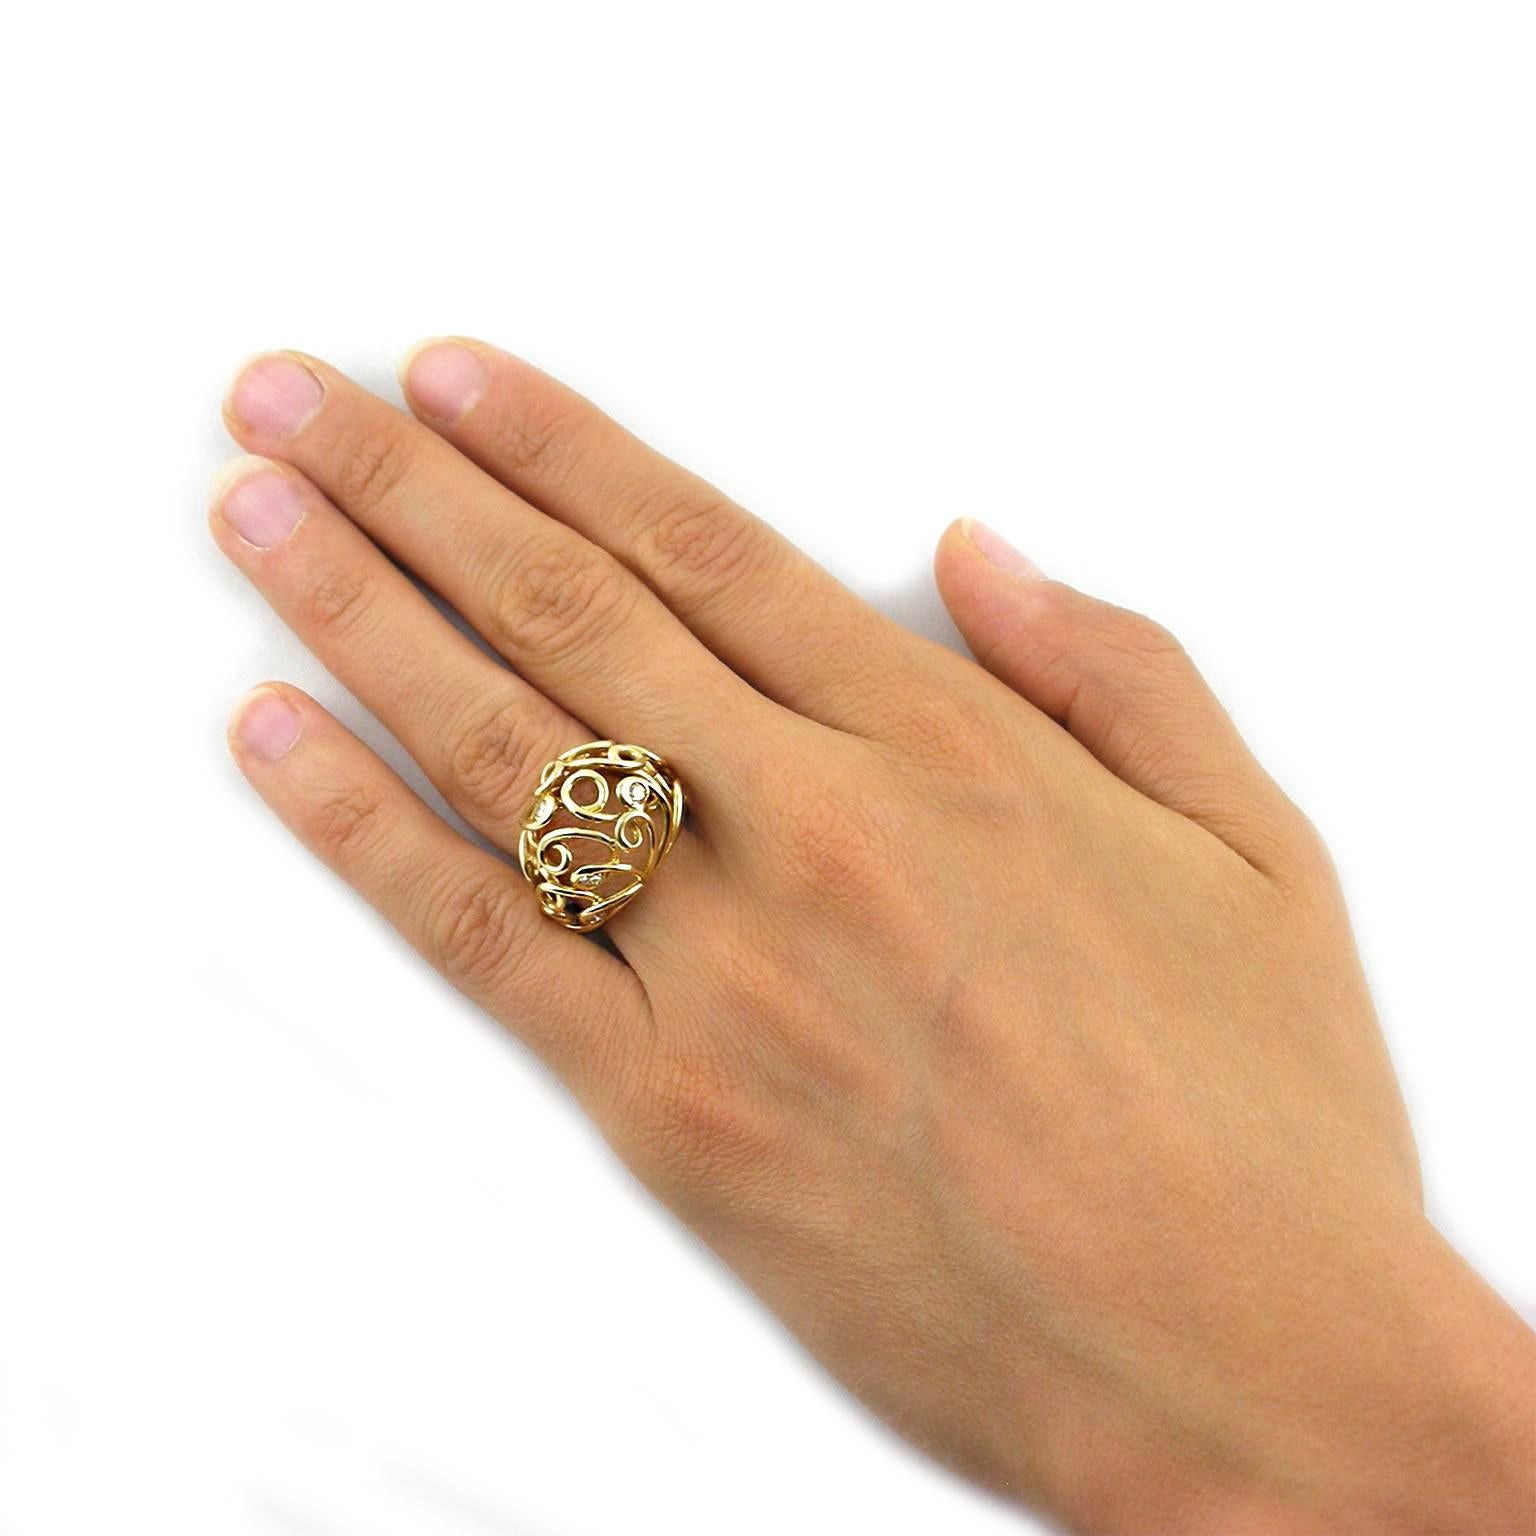 Jona design collection, hand crafted in Italy, 18 karat yellow gold twisted dome ring, enriched with 0.45 carats of white diamonds.  
Size US 6, can be sized to any specification.  
All Jona jewelry is new and has never been previously owned or